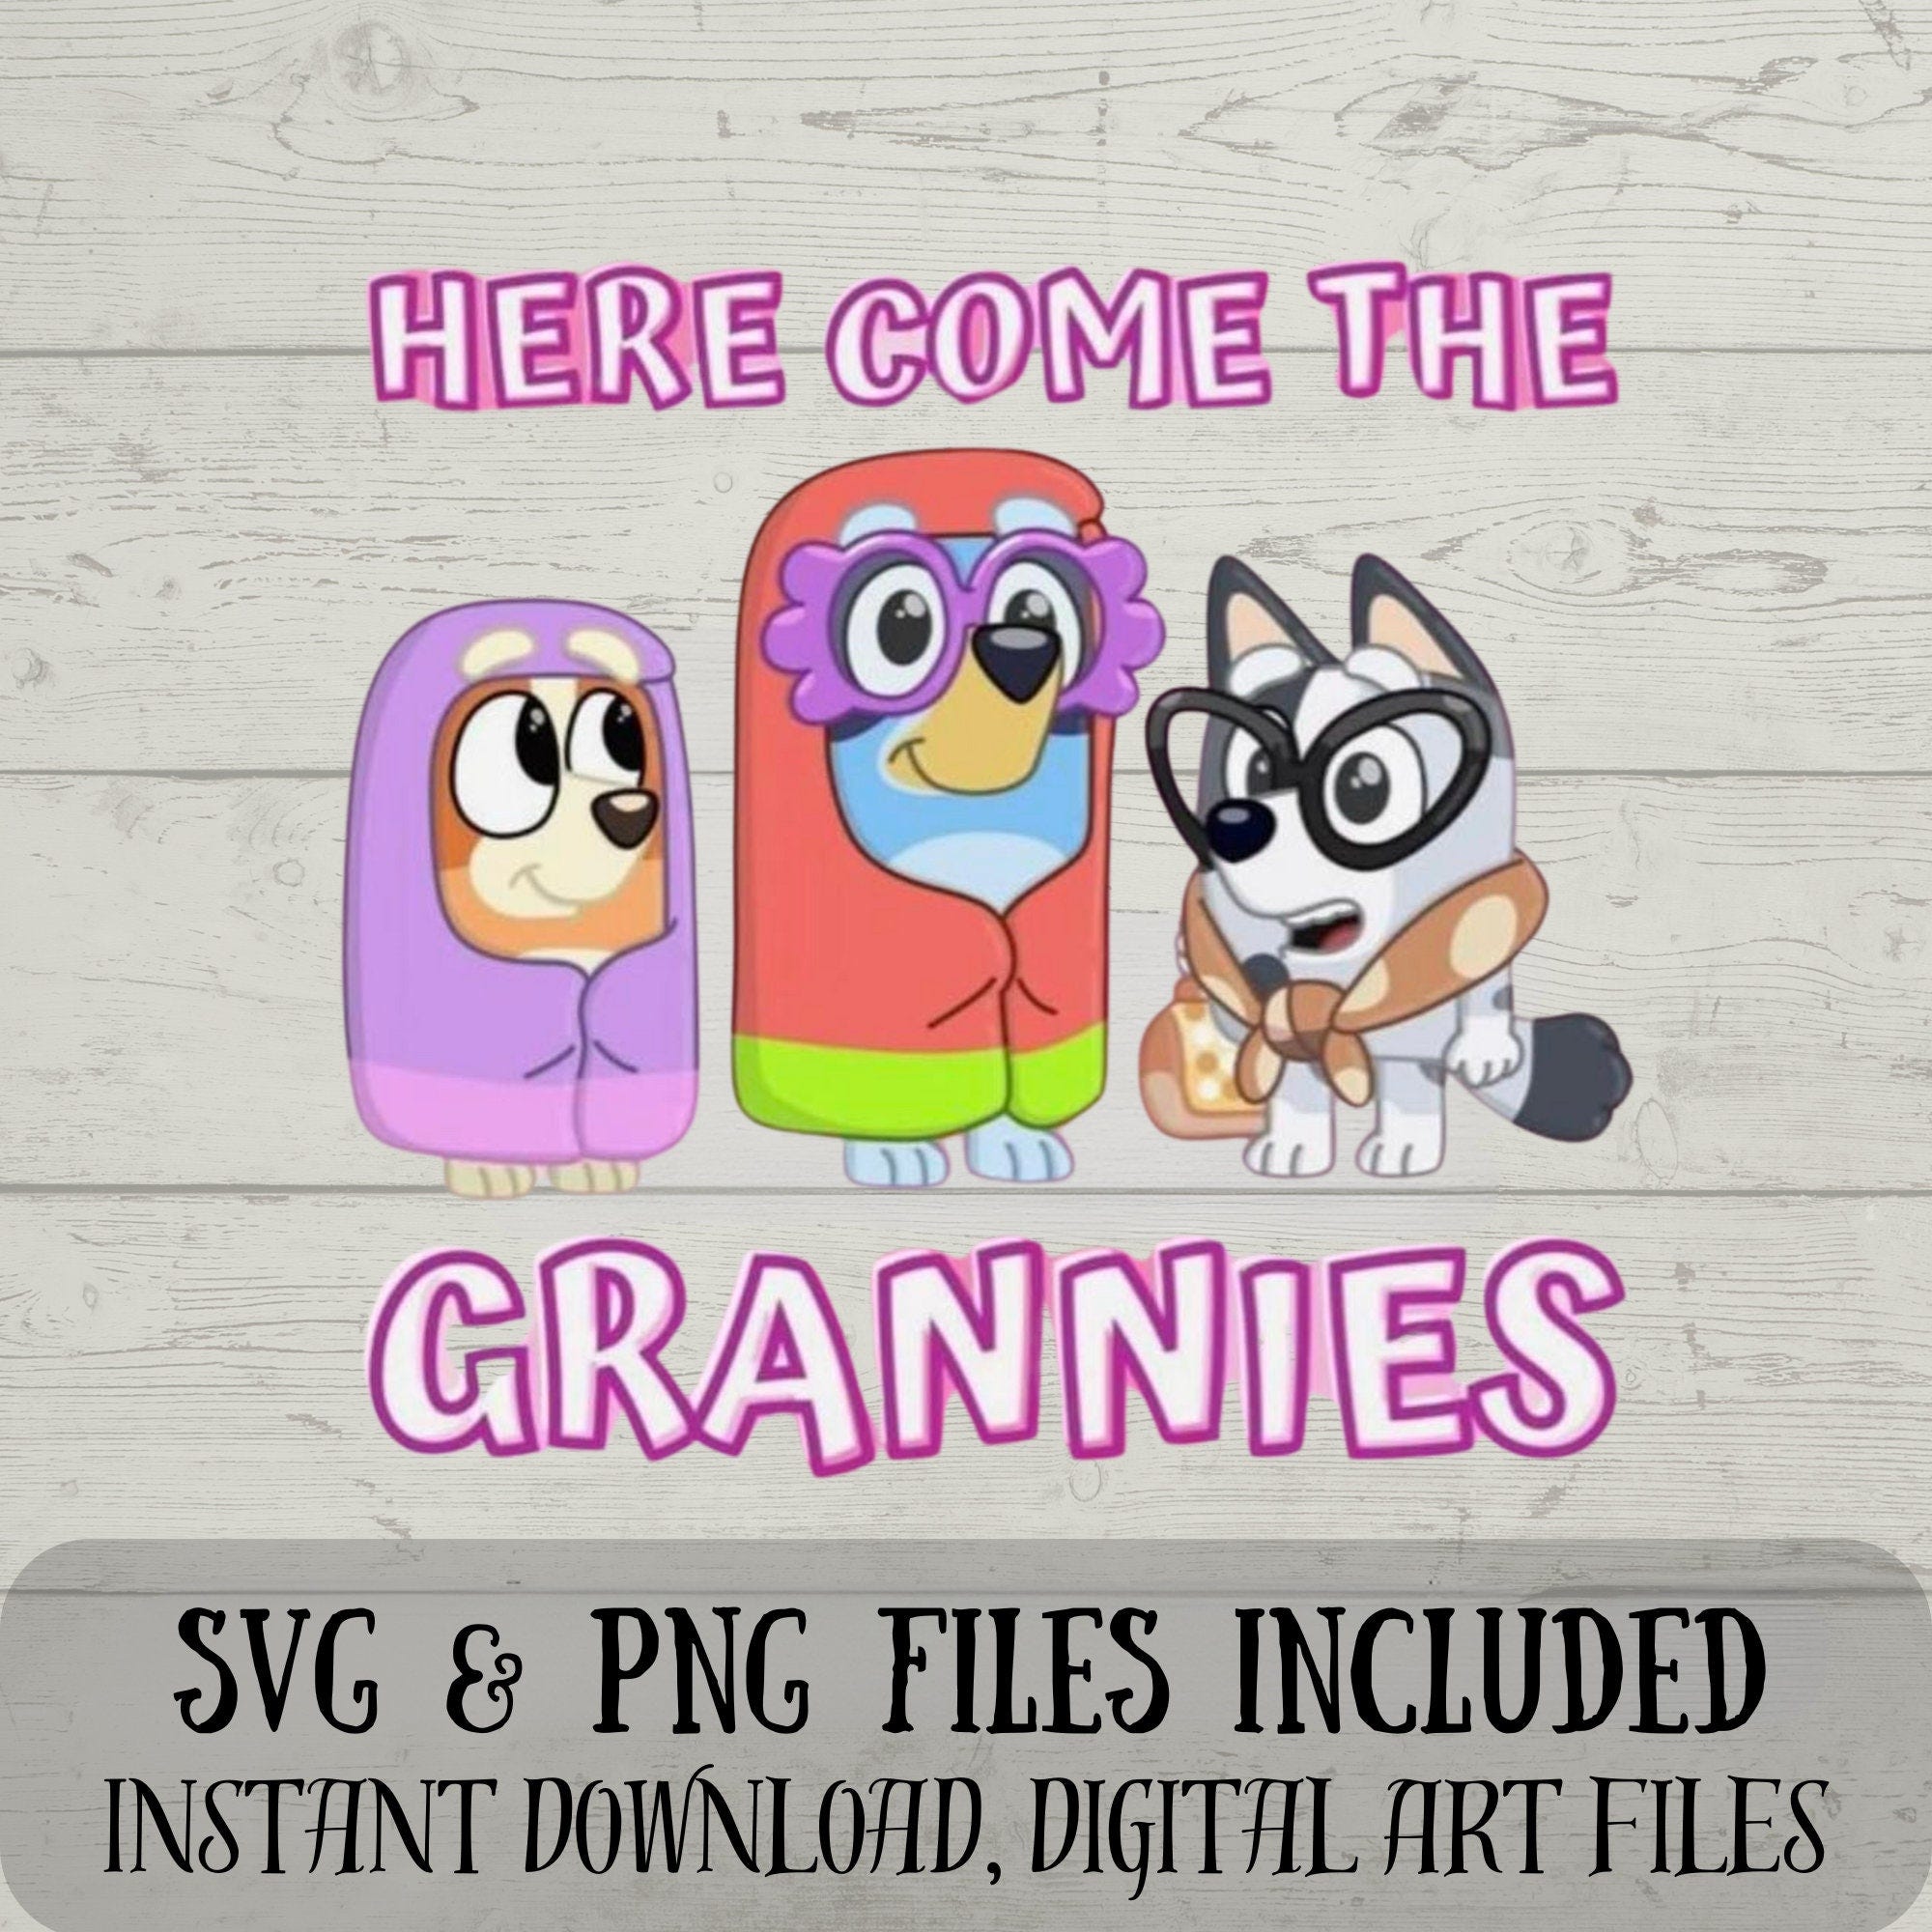 Here Come the Grannies SVG - The Grannies SVG - Bluey SVG - Digital Download - Fun Crafting - svg and png files included